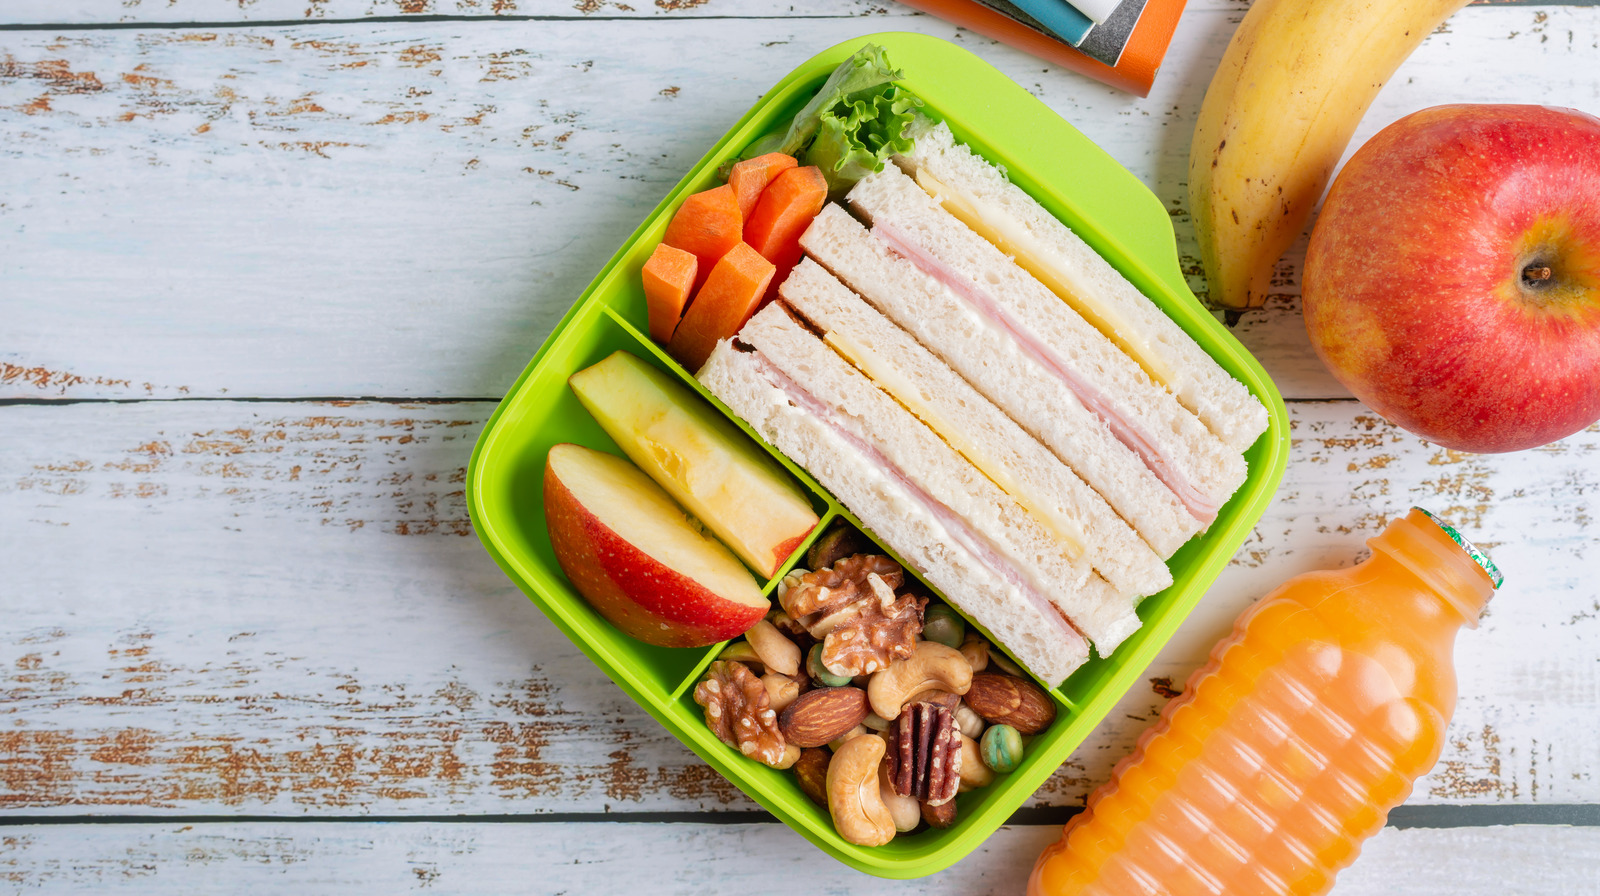 https://www.tastingtable.com/img/gallery/how-to-make-sure-your-school-lunches-stay-cold-without-an-icepack/l-intro-1659727359.jpg